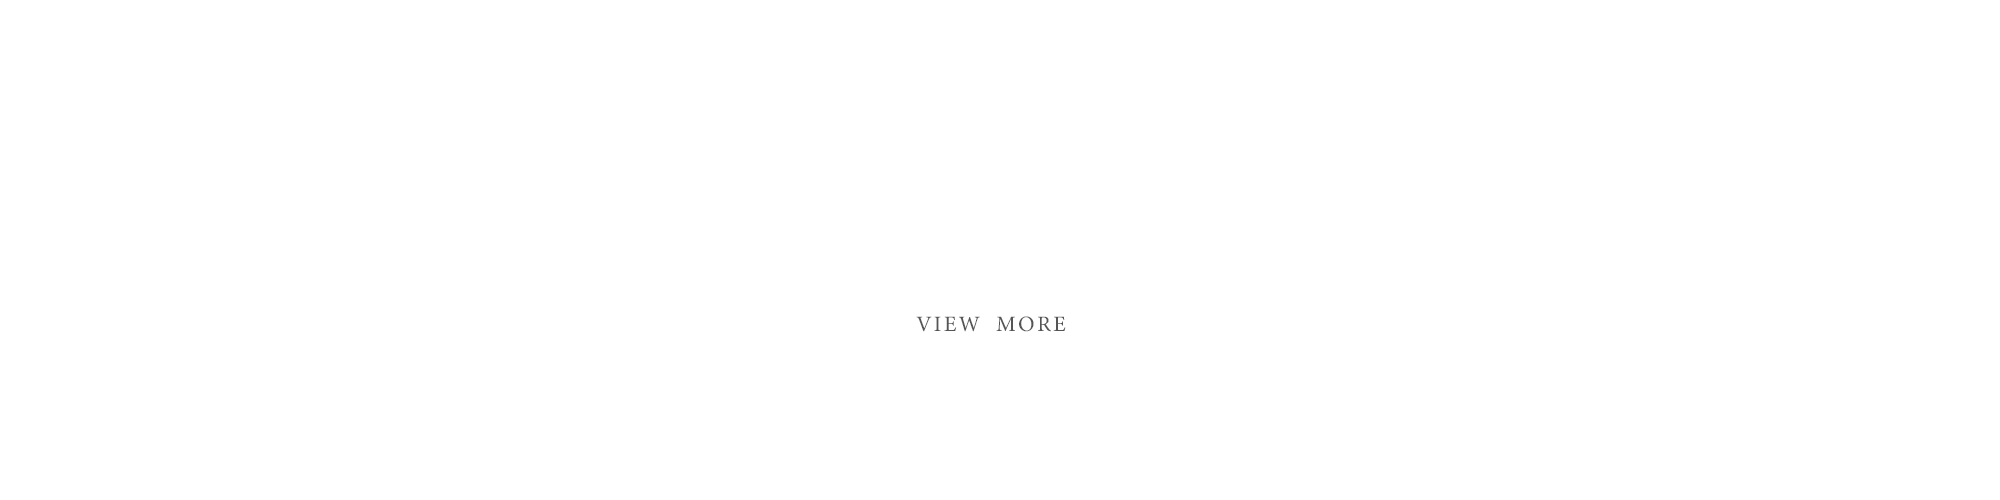 banner_company_cover